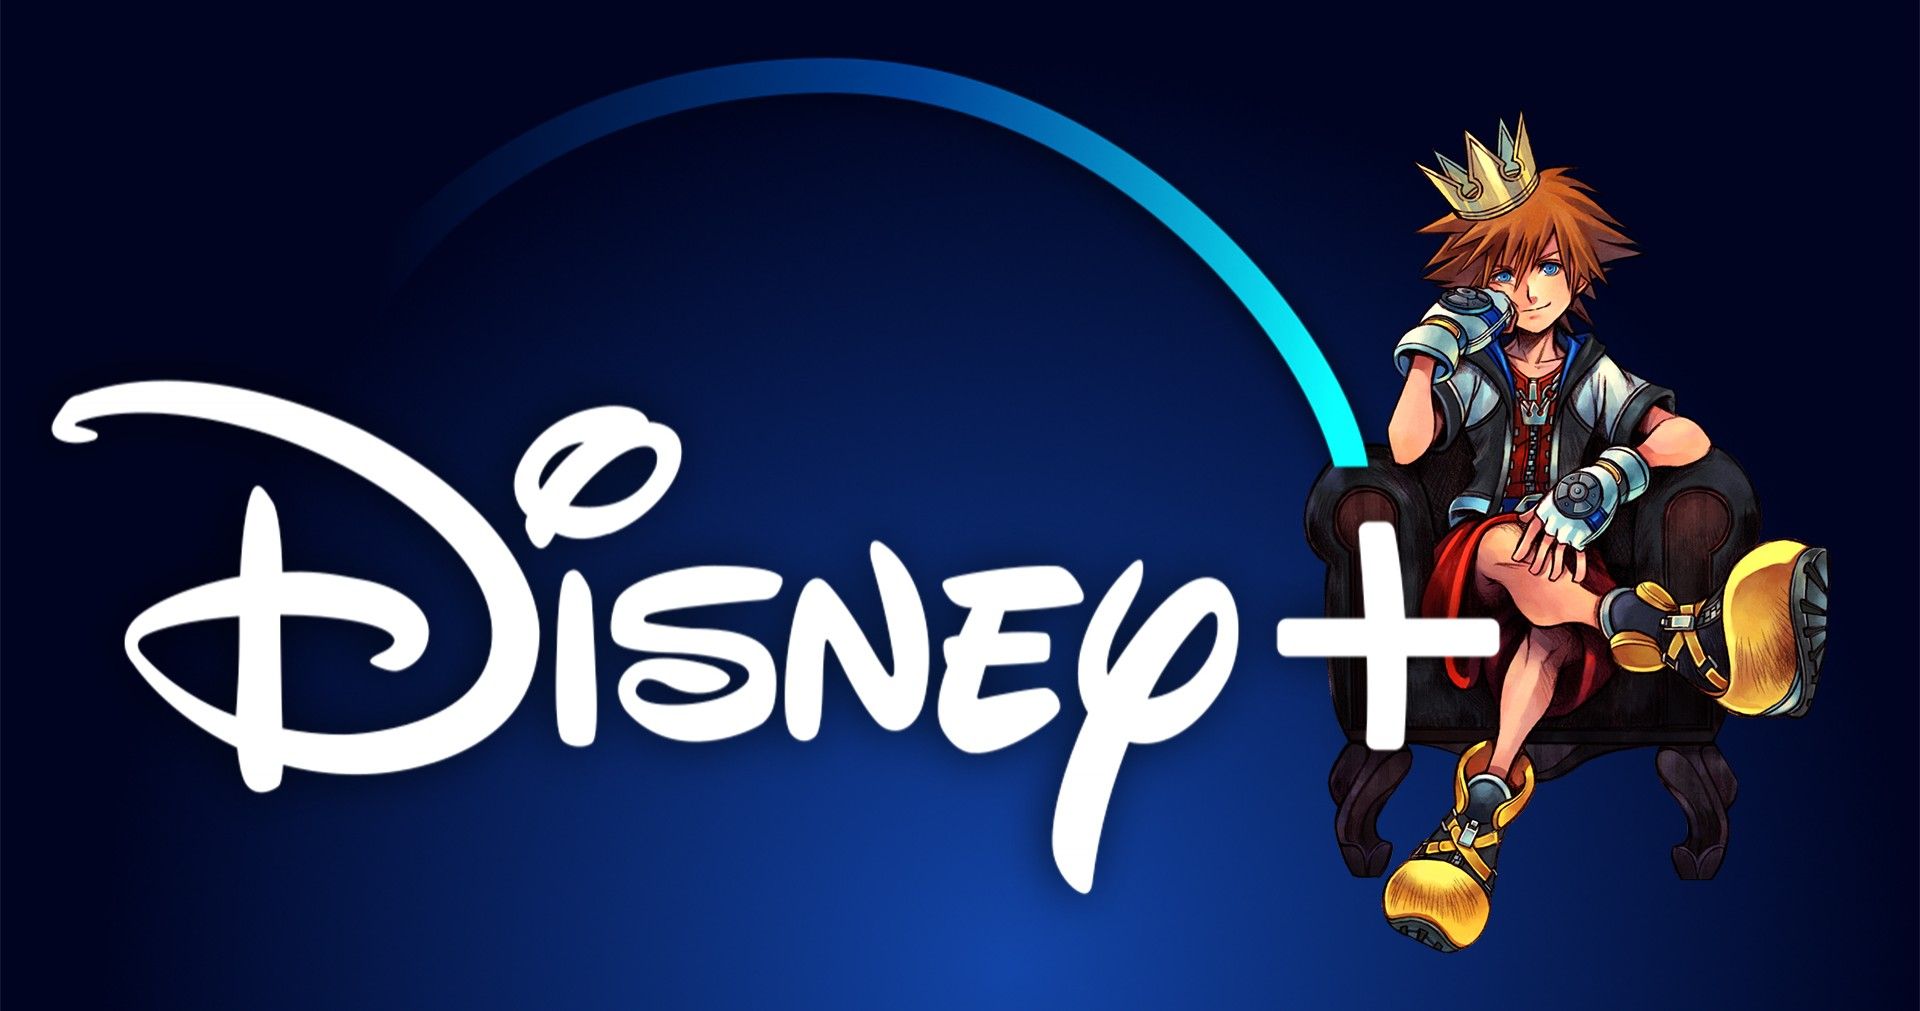 Here's What The Kingdom Hearts TV Series Needs To Do To Be A Hit